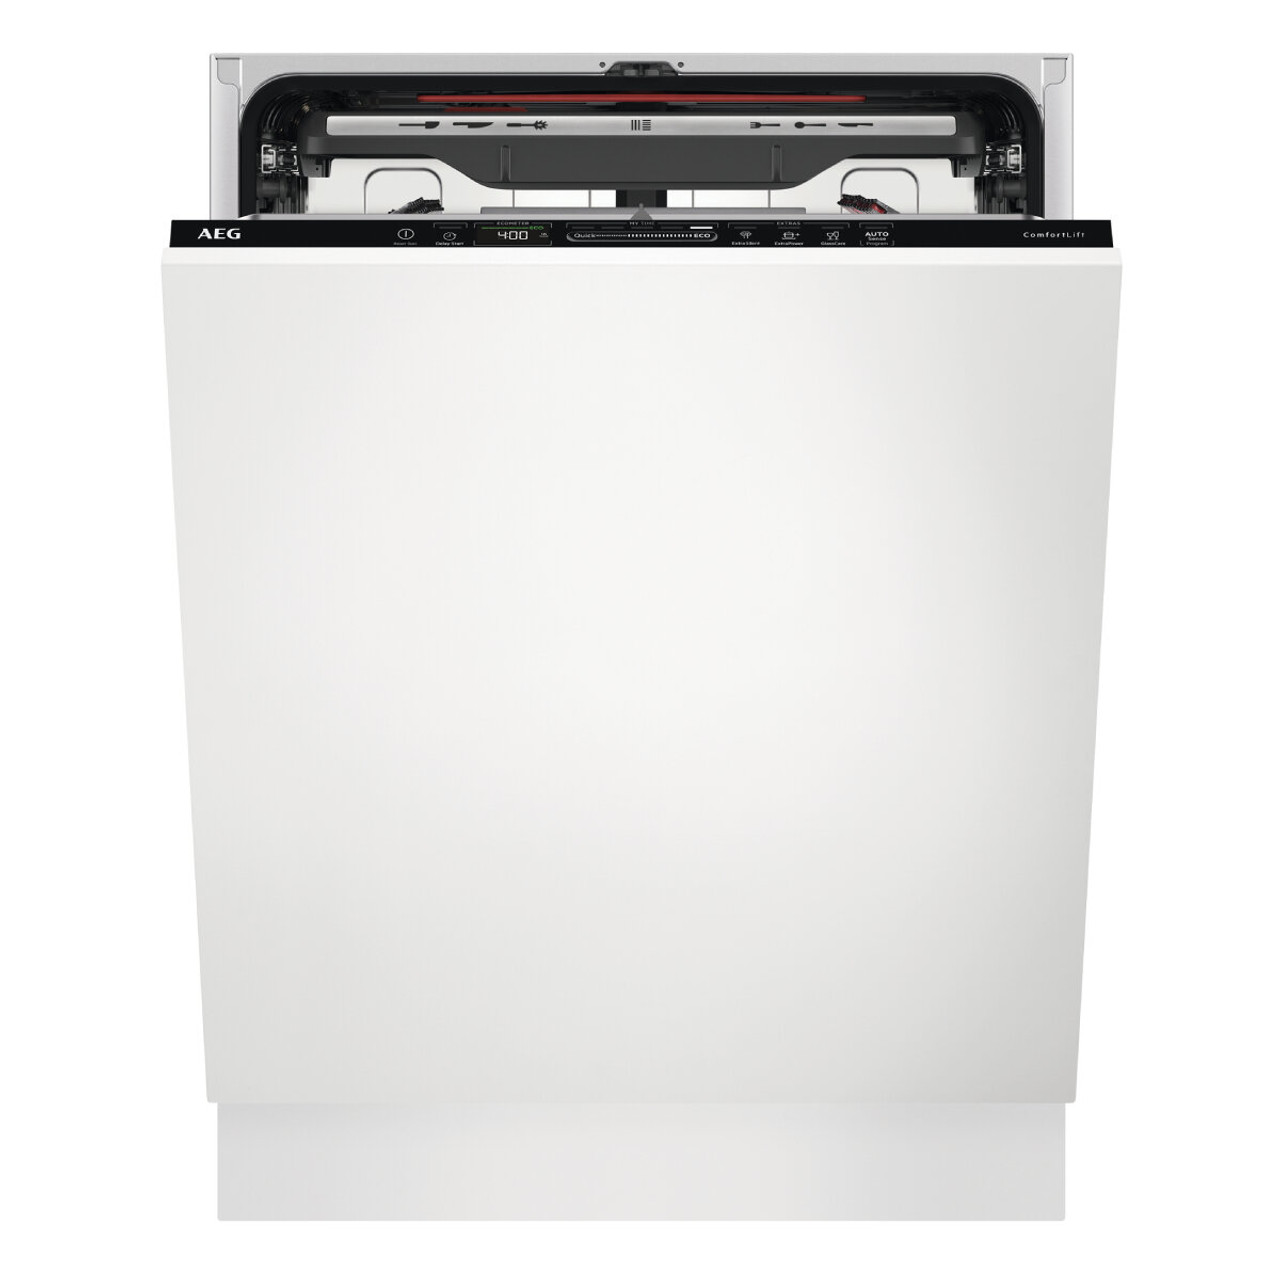 FSE93000RO - 60cm Fully Integrated ProClean Dishwasher